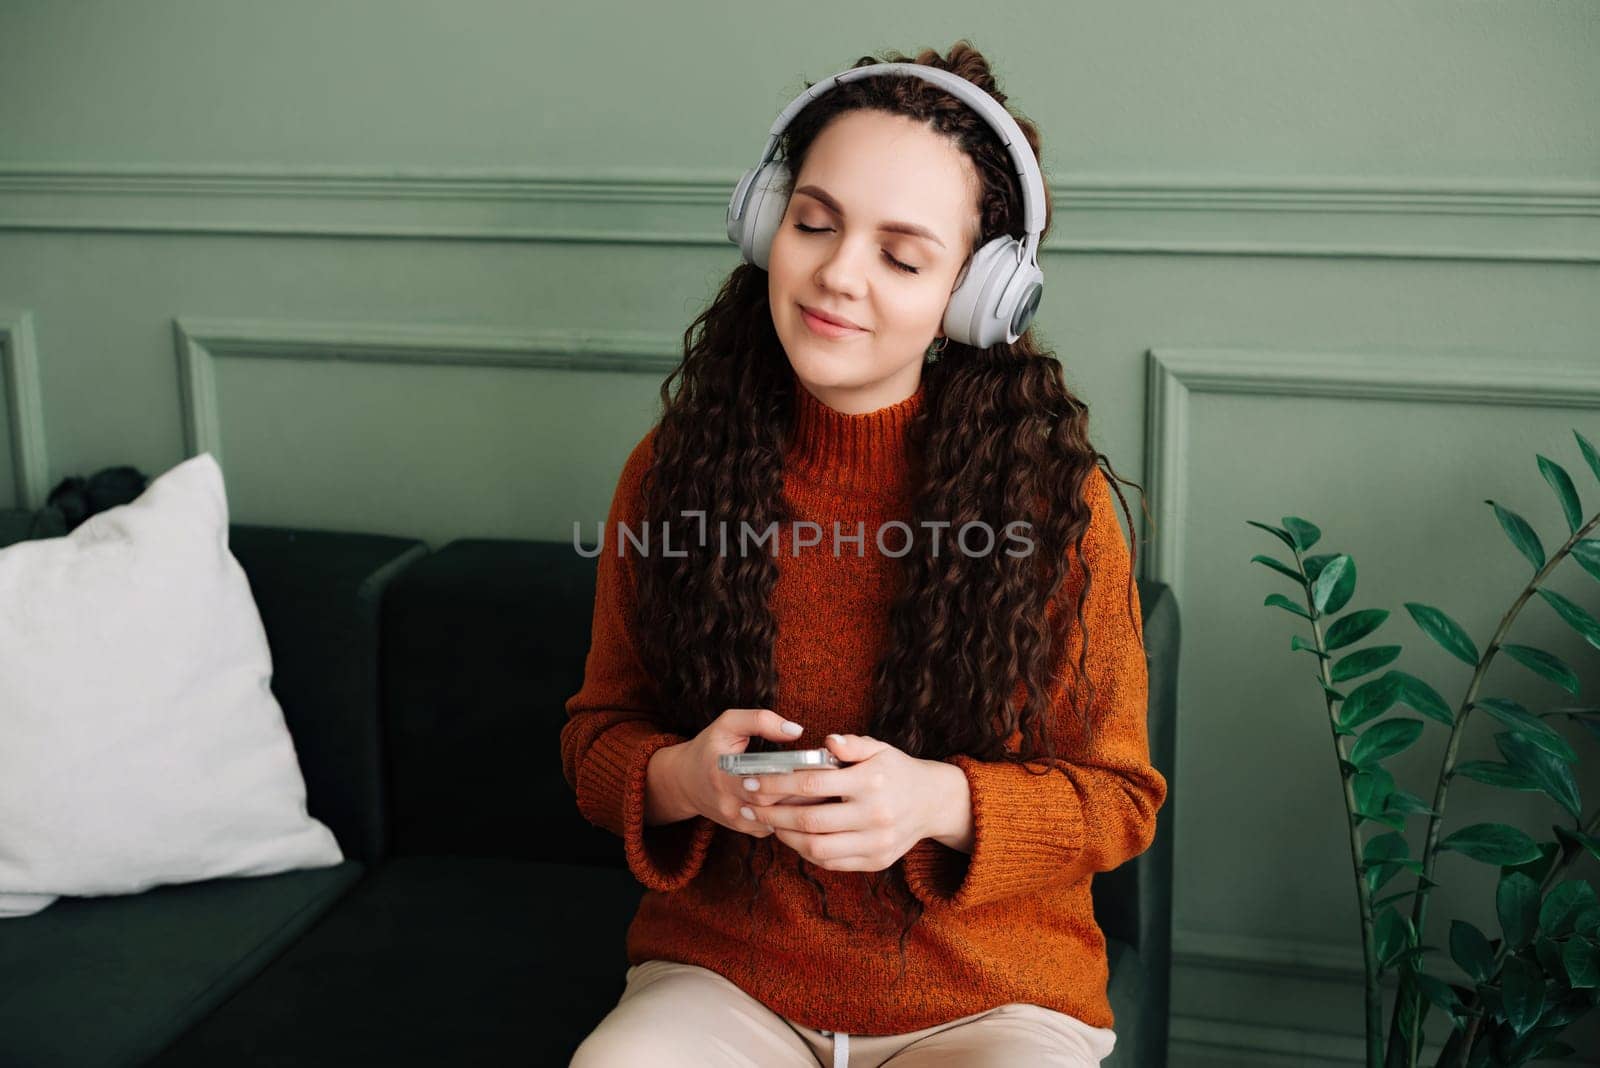 A calm, relaxed, carefree young woman listens to music, an audio podcast or audiobook on her cell phone while sitting at home, meditating and relaxing, feeling peace of mind with her eyes closed